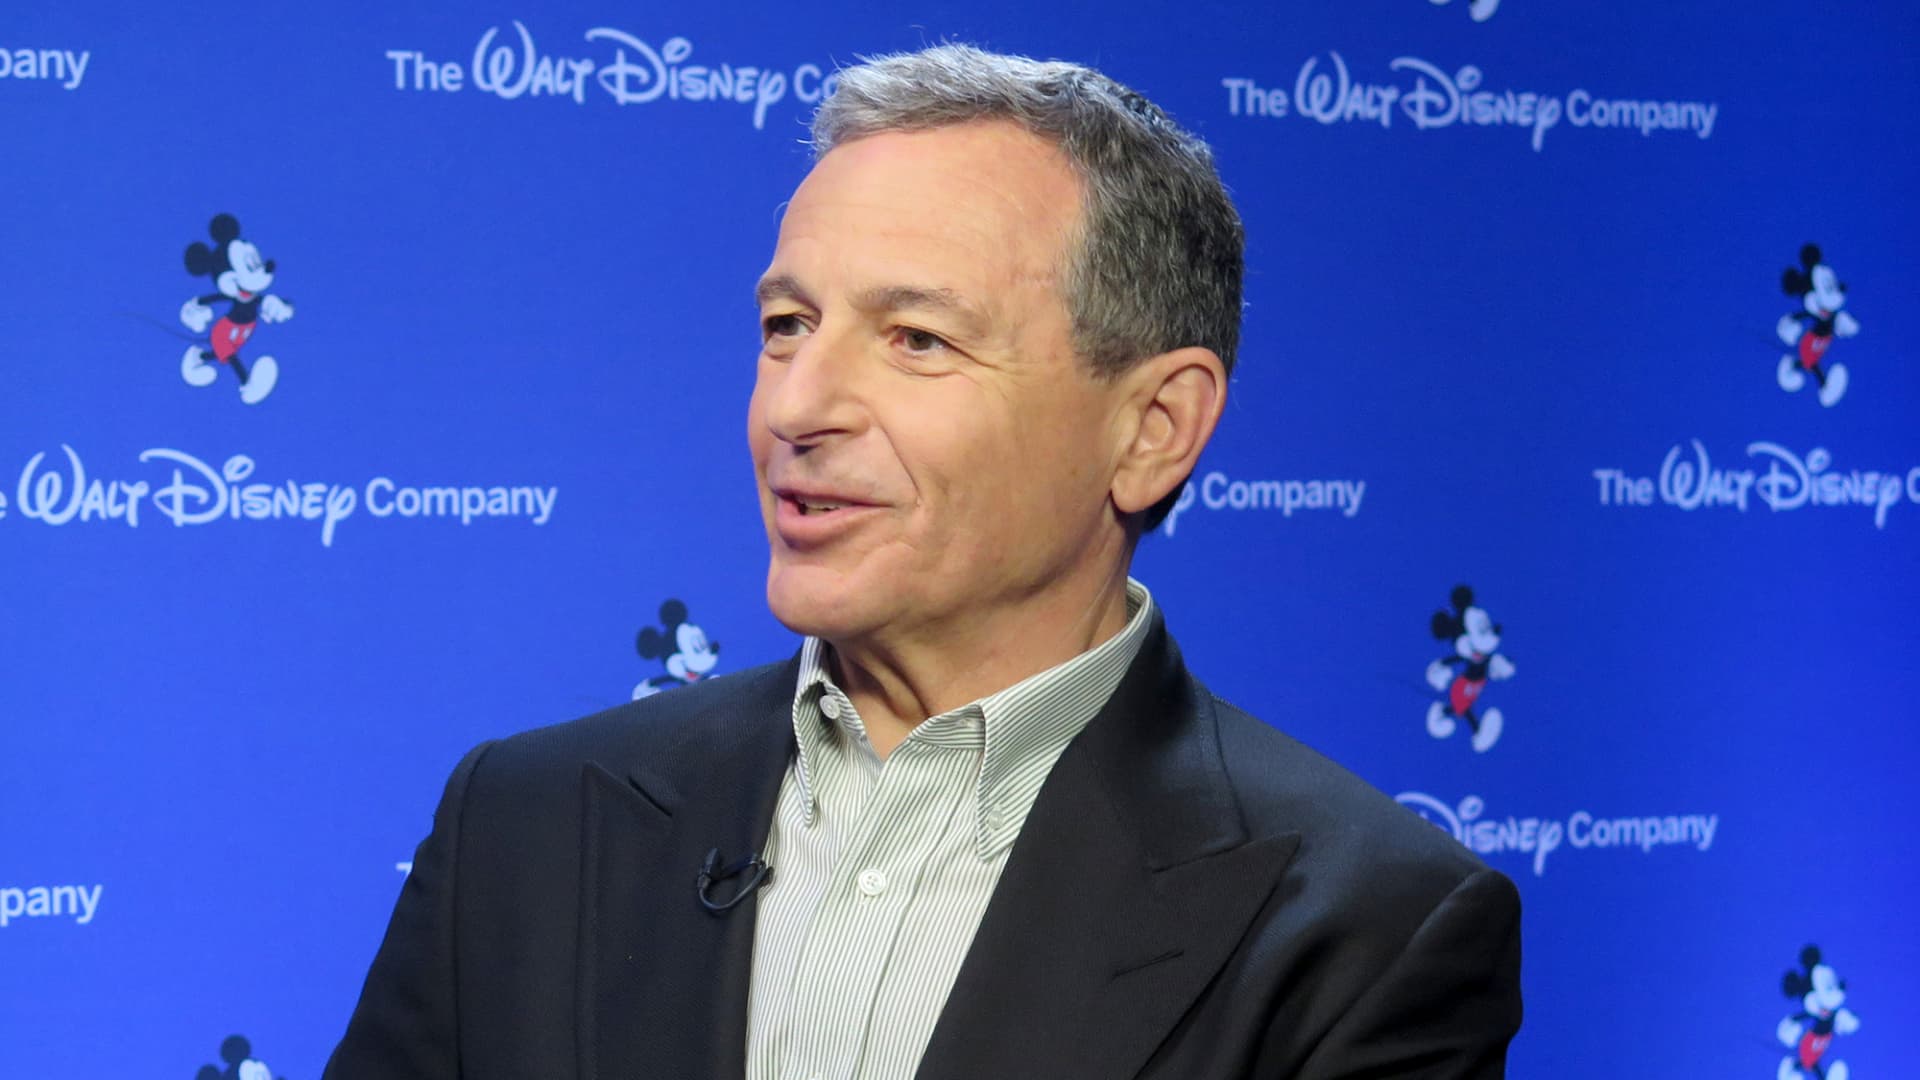 Disney’s decision to replace Chapek with Iger makes everyone look bad